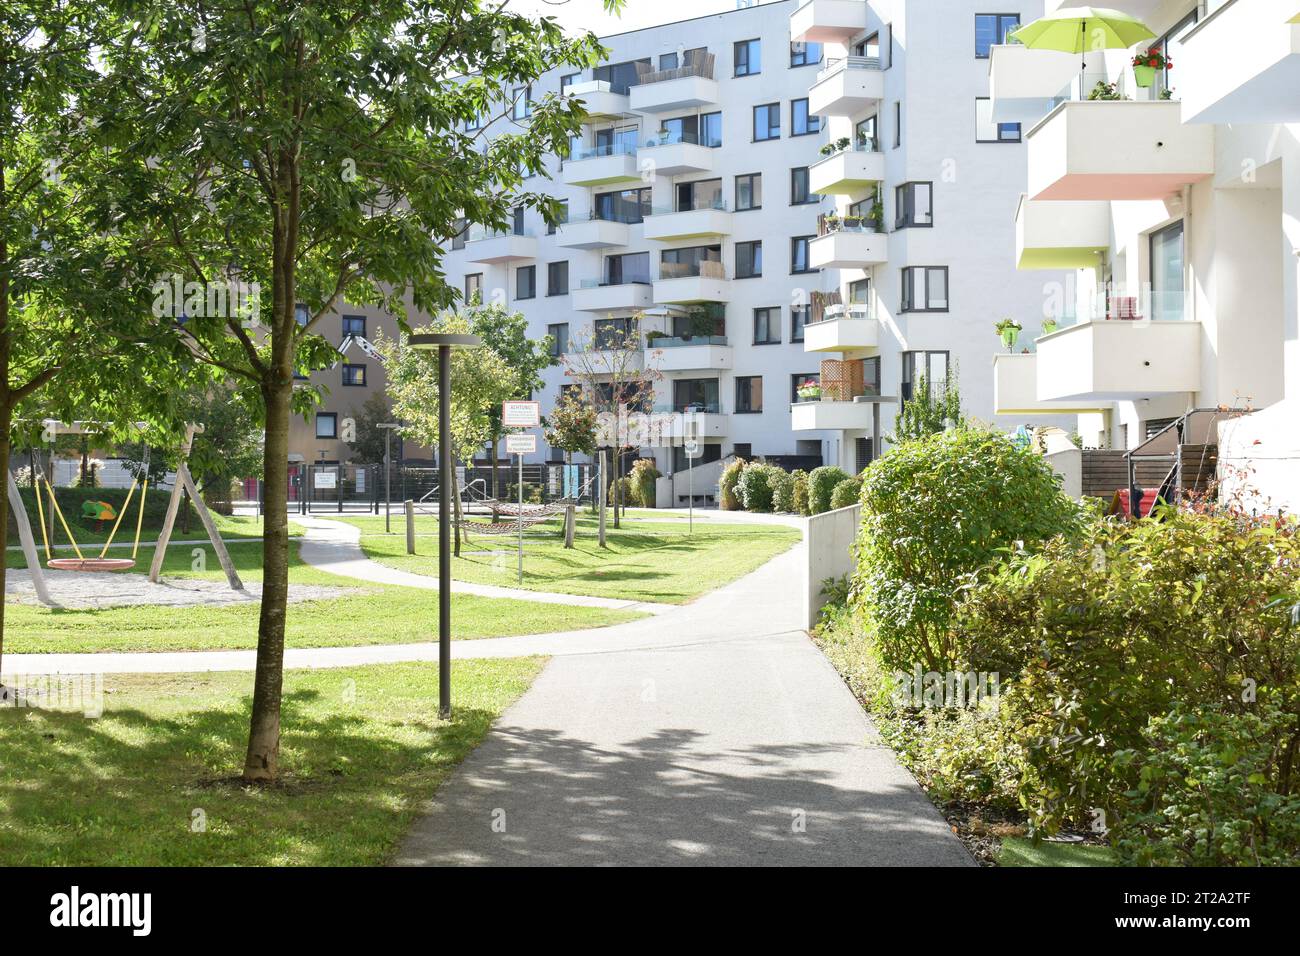 VIENNA, AUSTRIA - OCTOBER 2, 2023: Residential buildings in Seestadt Aspern, one of Europe's largest urban development areas. Stock Photo